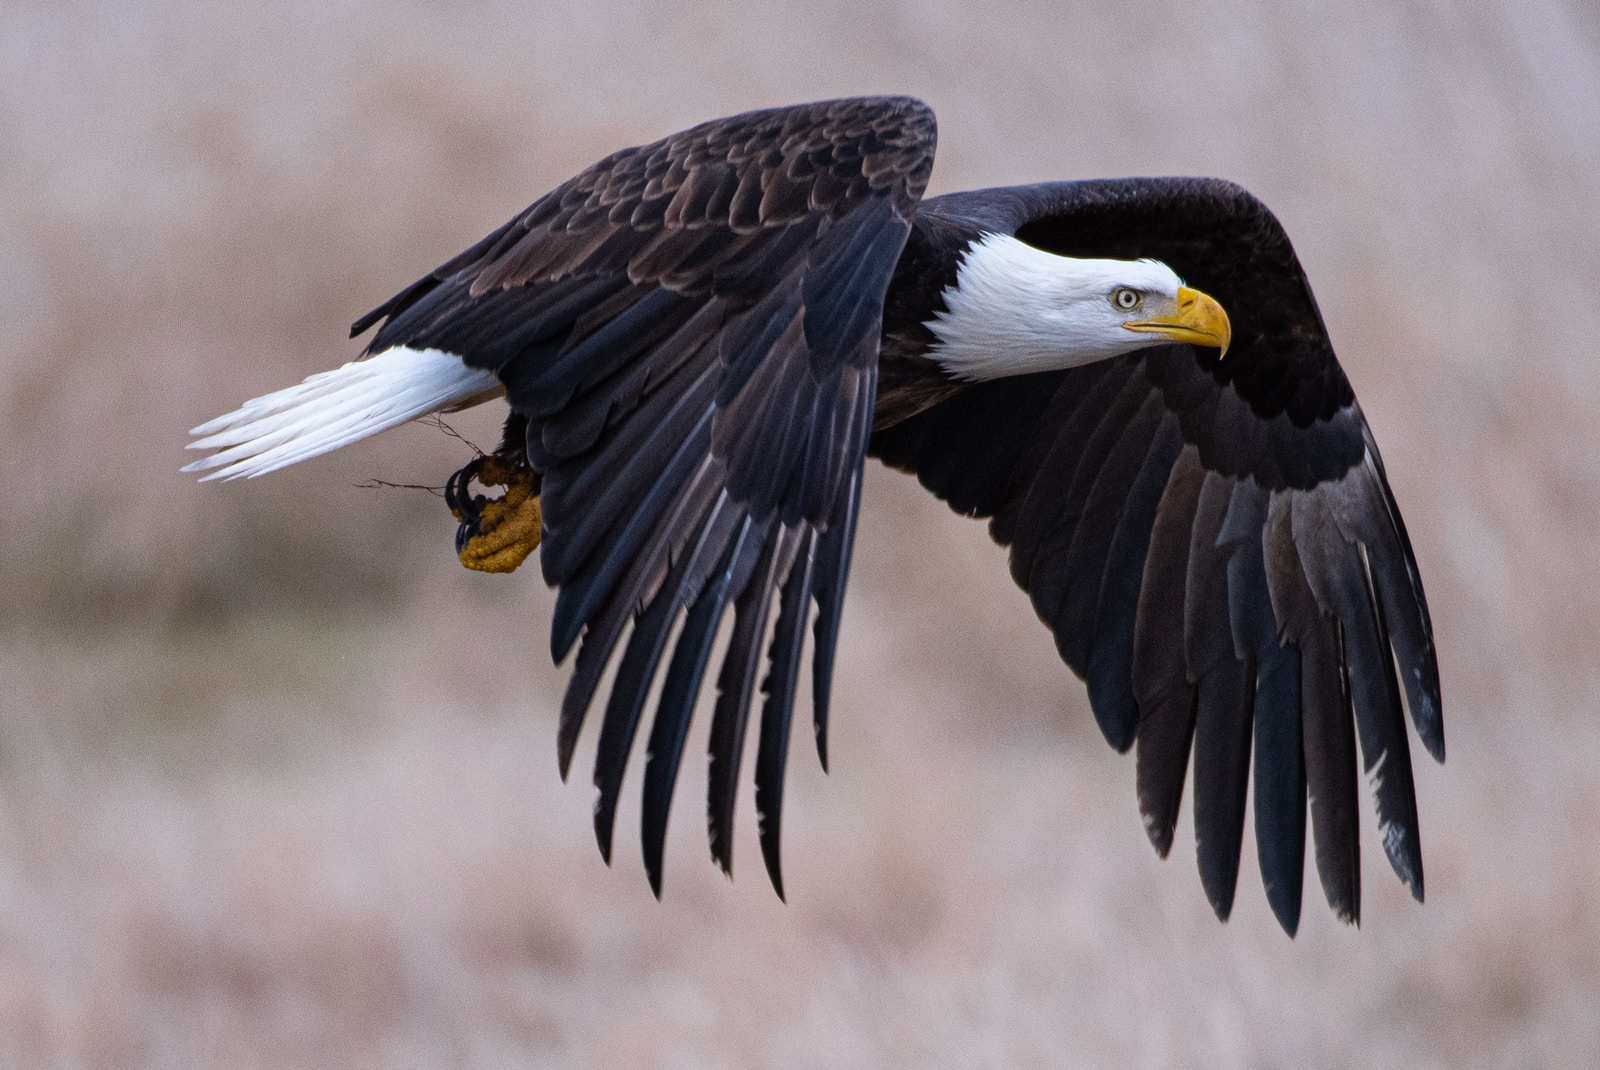 Soaring with the eagles, Utah's Division of Wildlife bald eagle guide